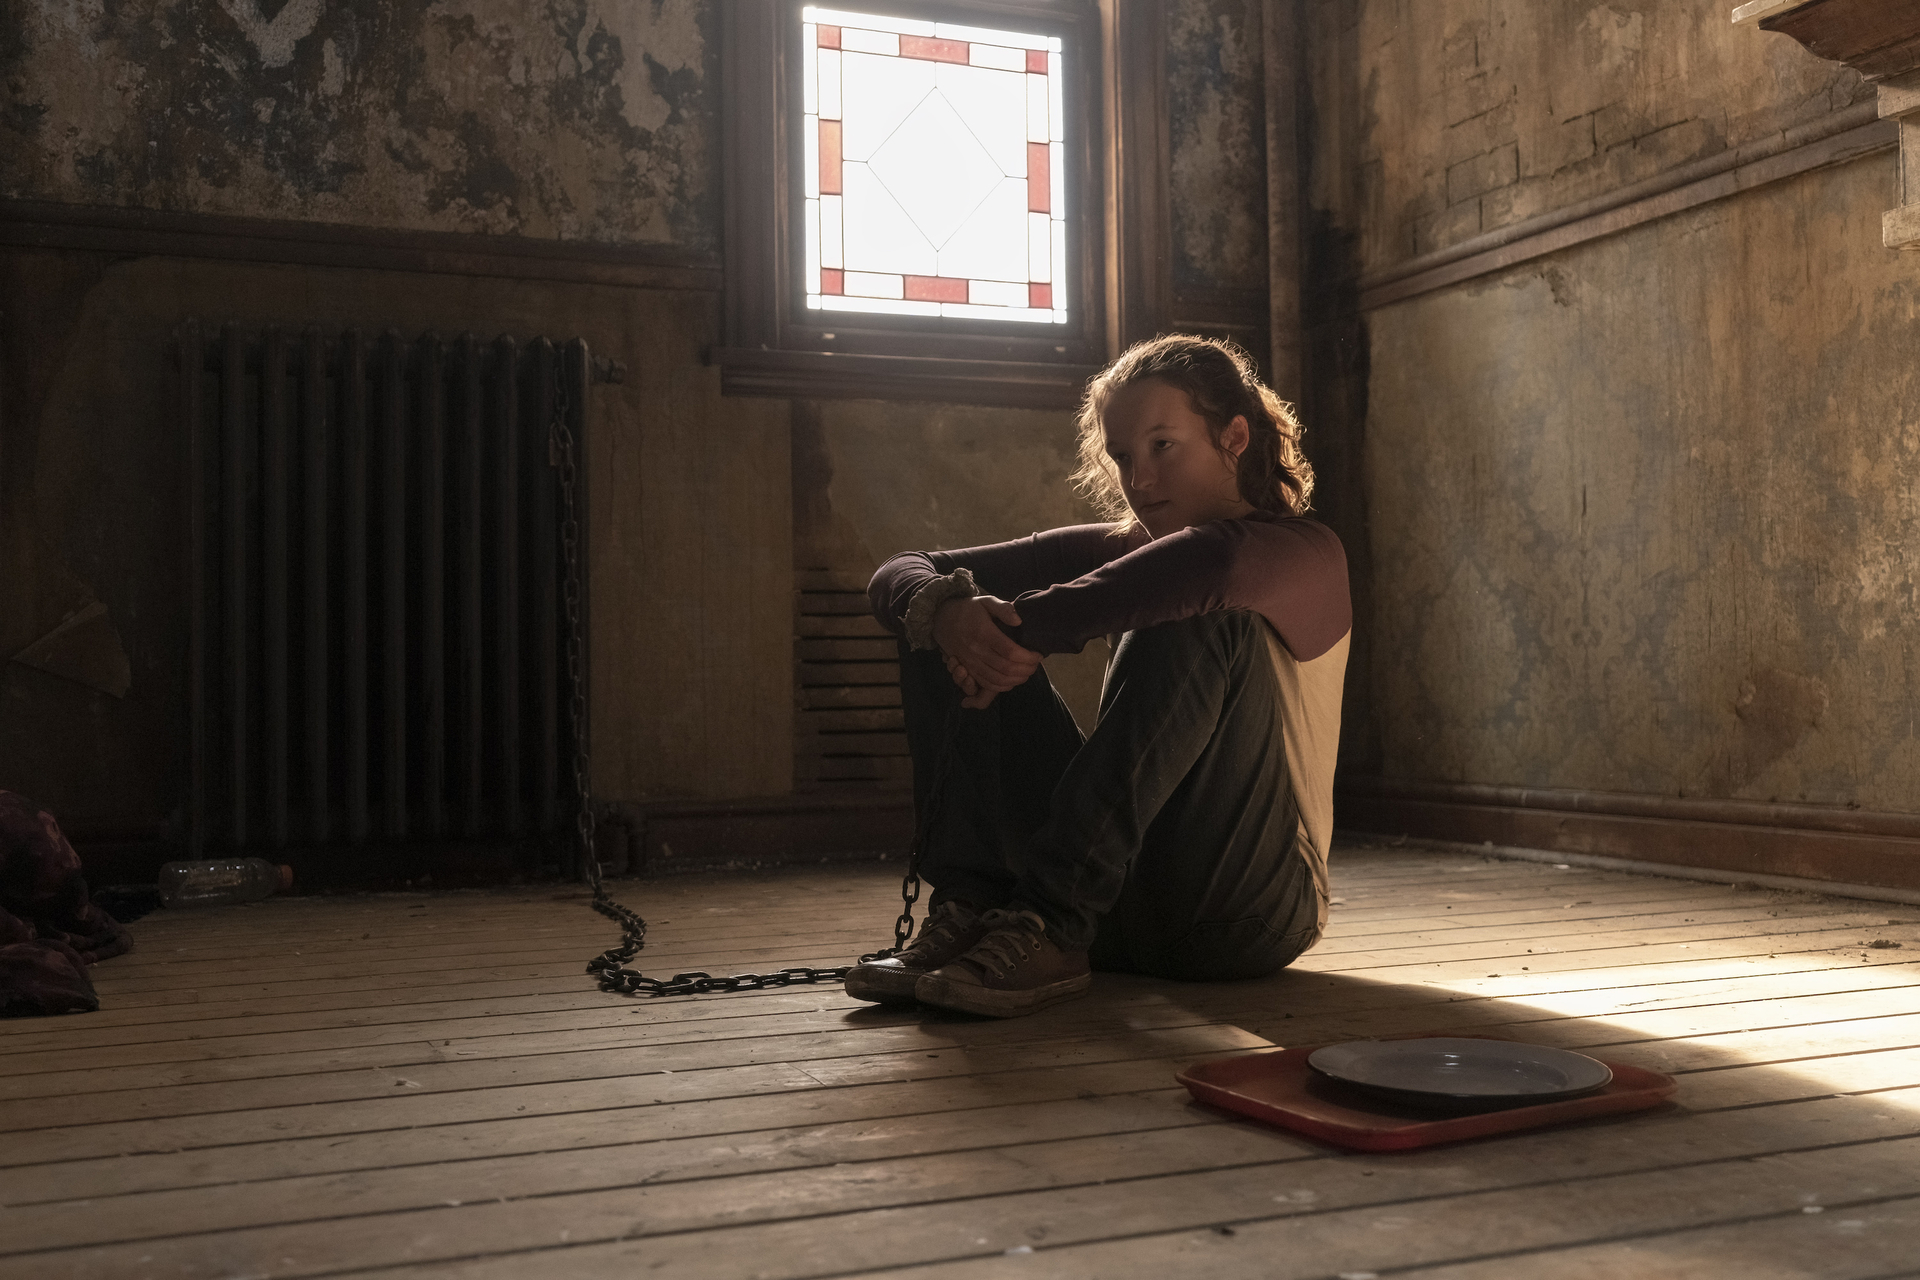 The Last of Us HBO Episode 3 Release Date and Time: When is the